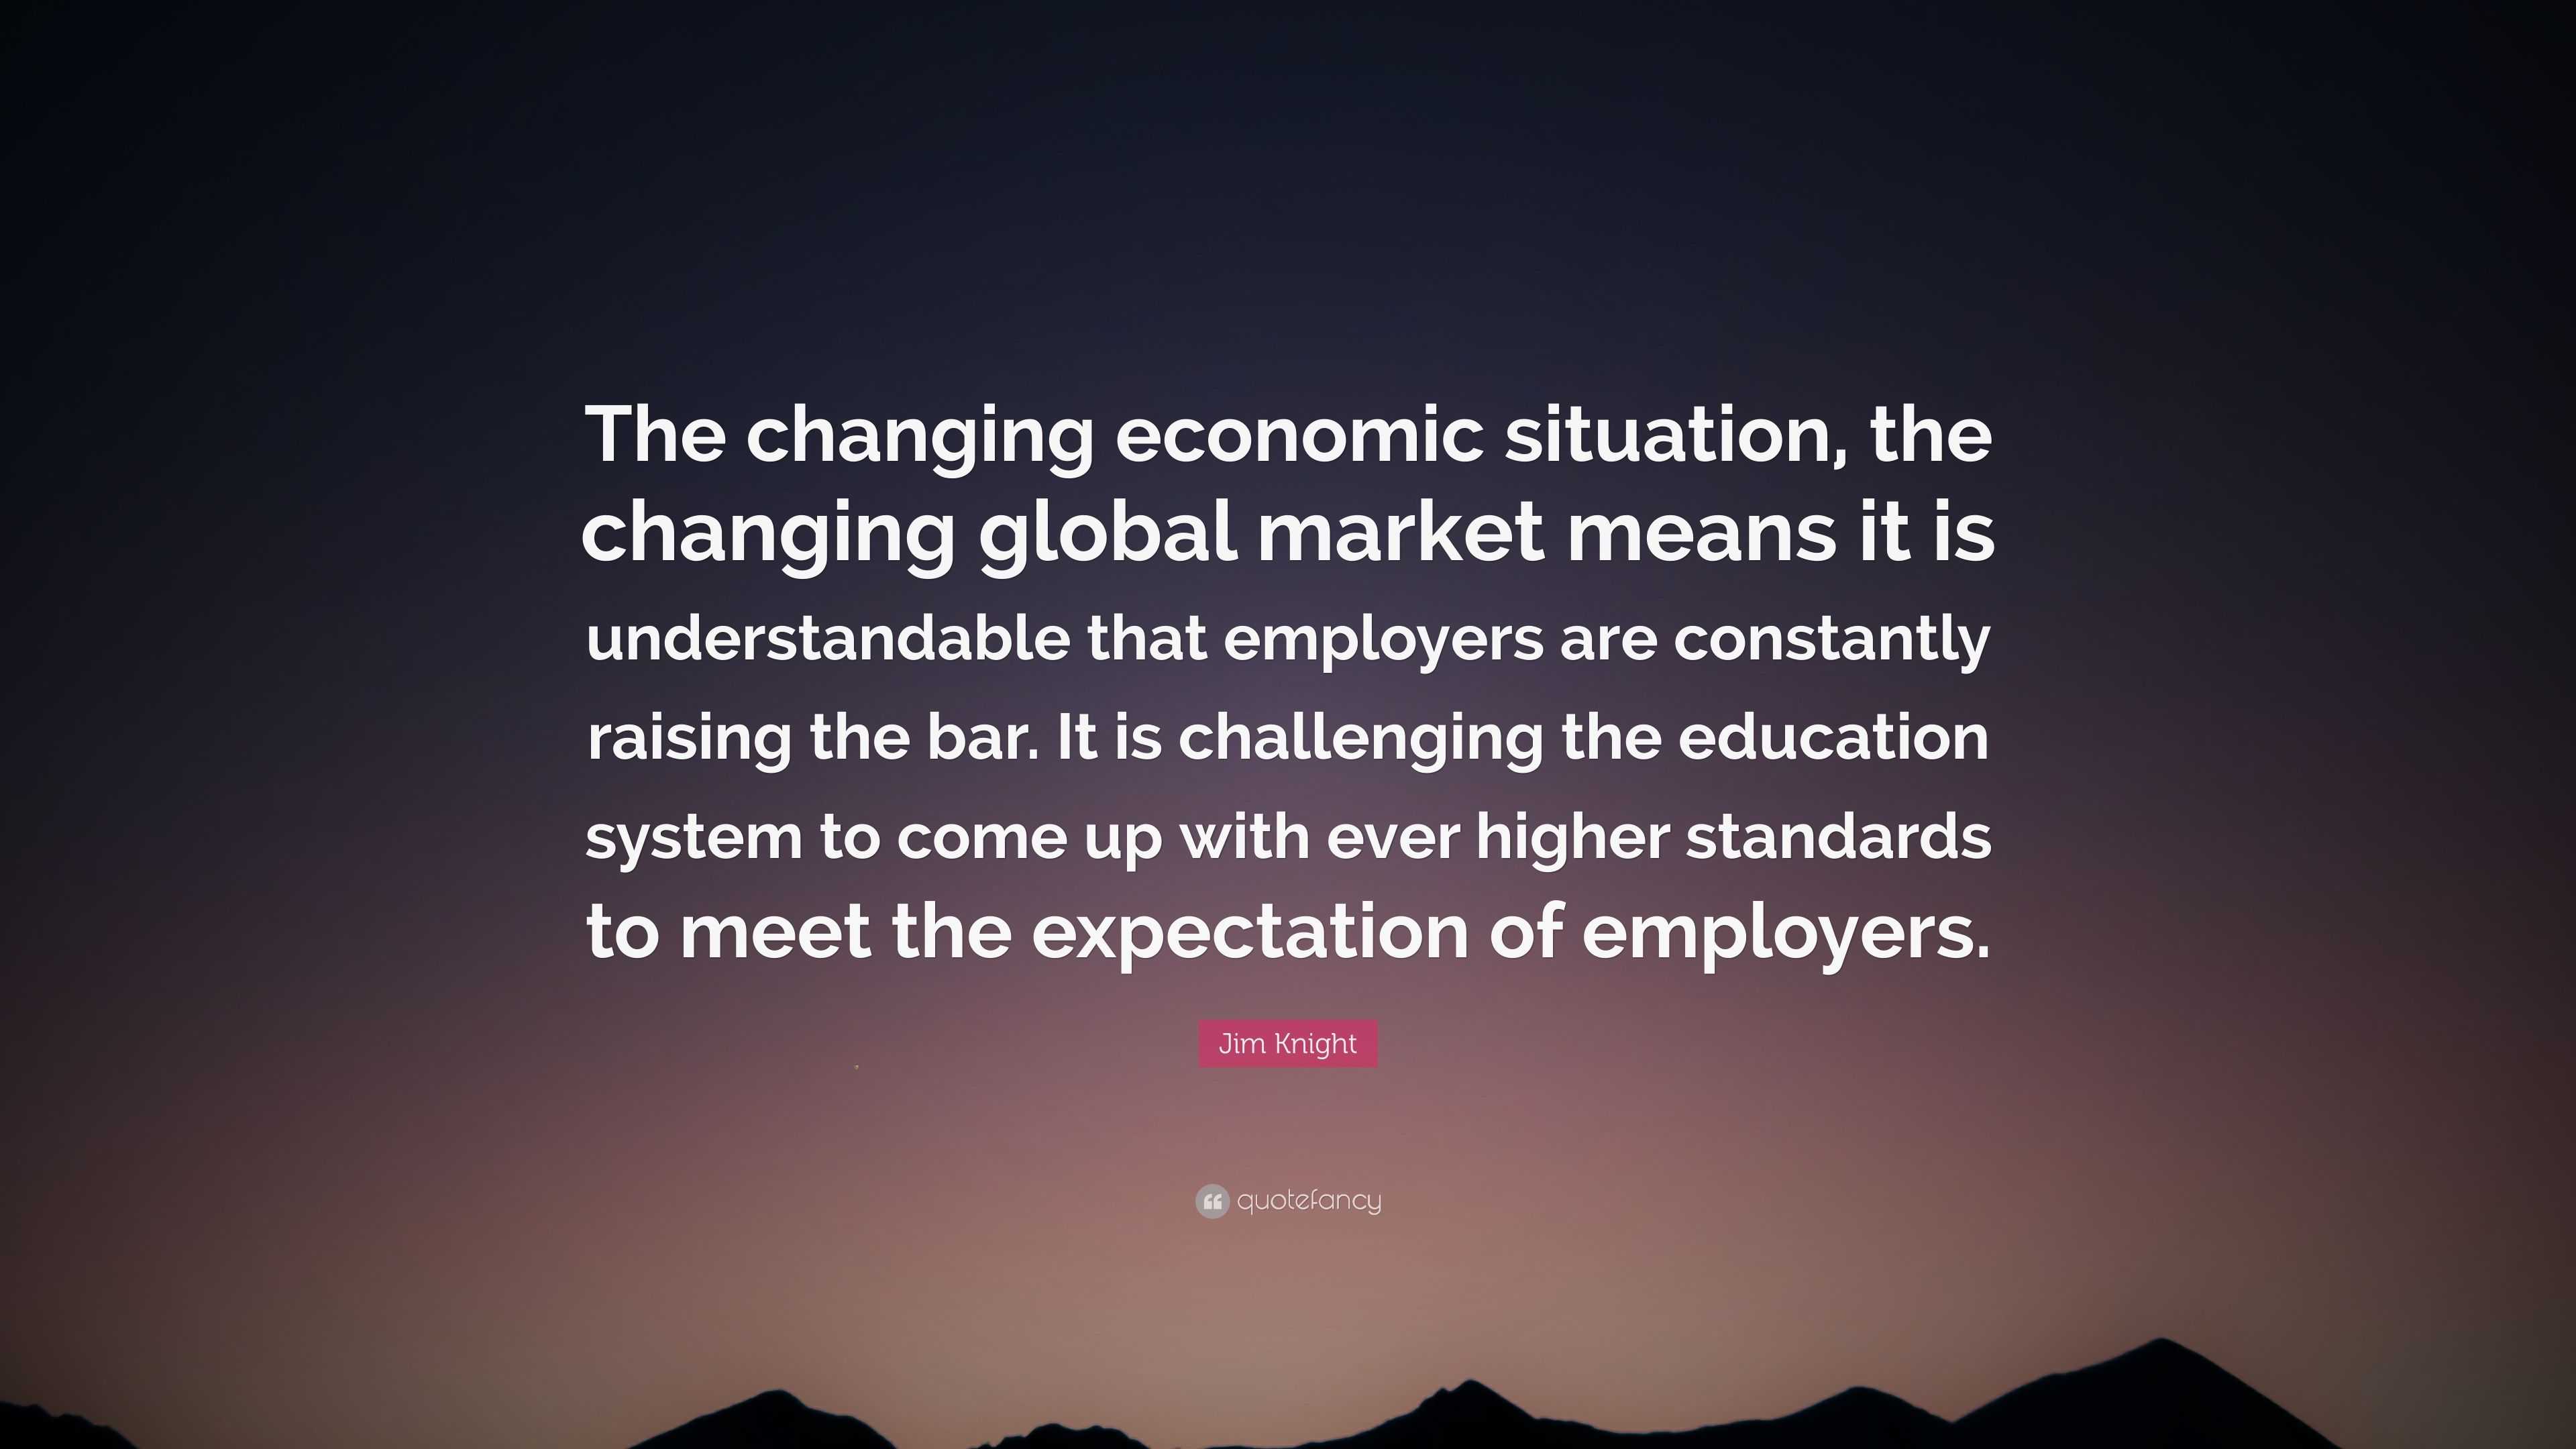 Jim Knight Quote: “The changing economic situation, the changing global